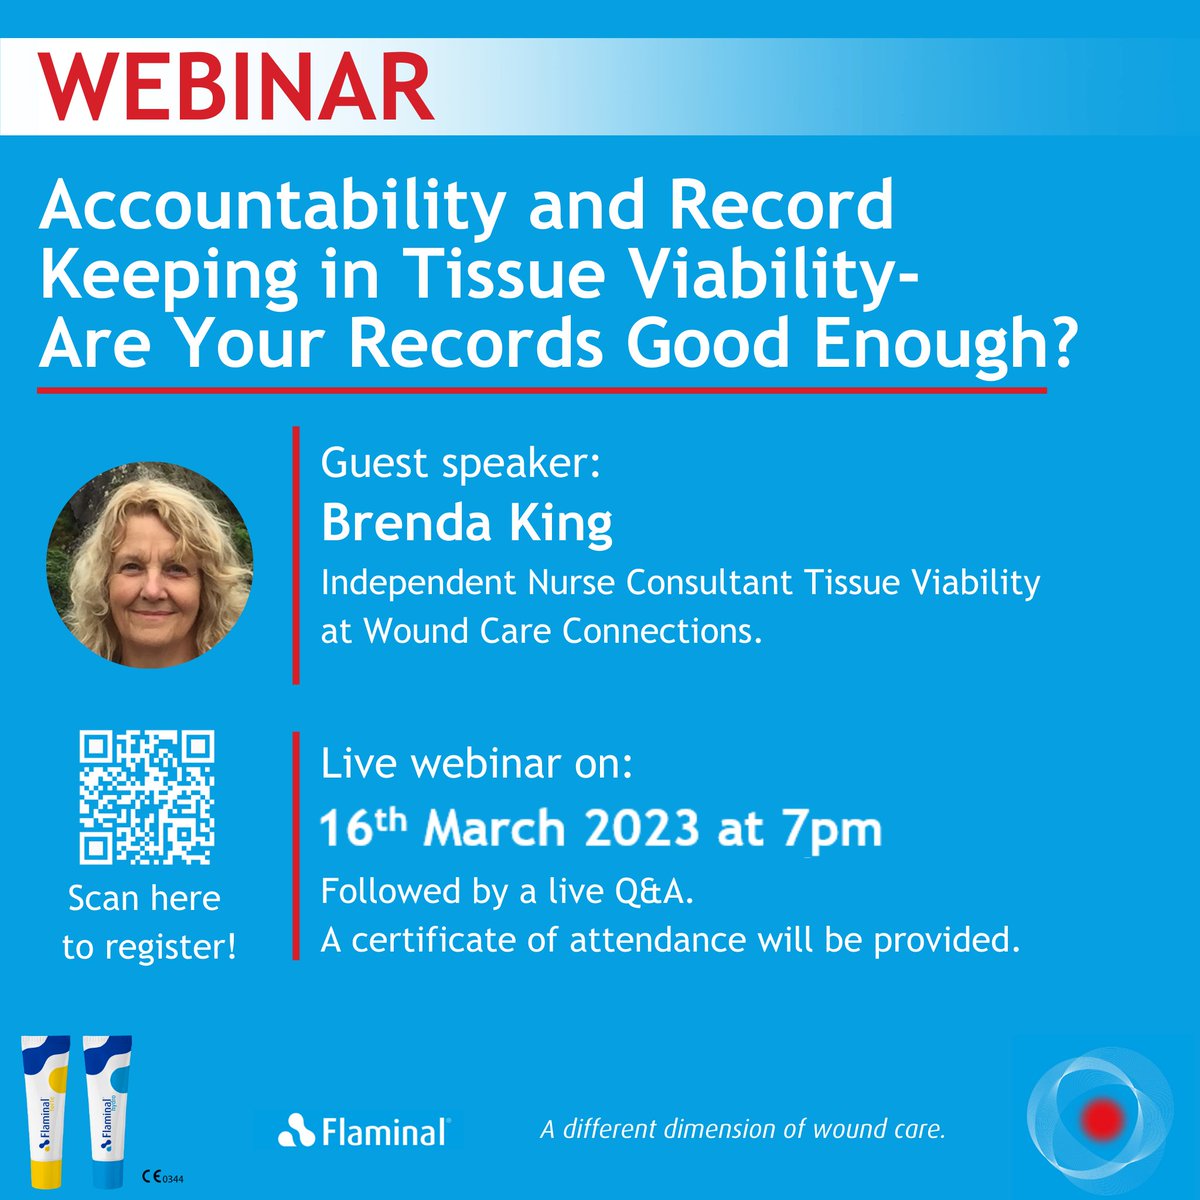 Flaminal® is back with another webinar! Taking place 16th March at 7PM, a FREE virtual learning event. Independent Nurse consultant in TV, Brenda King, will explore 'Accountability and Record Keeping in Tissue Viability- Are Your Records Good Enough?' bit.ly/3RISUPV